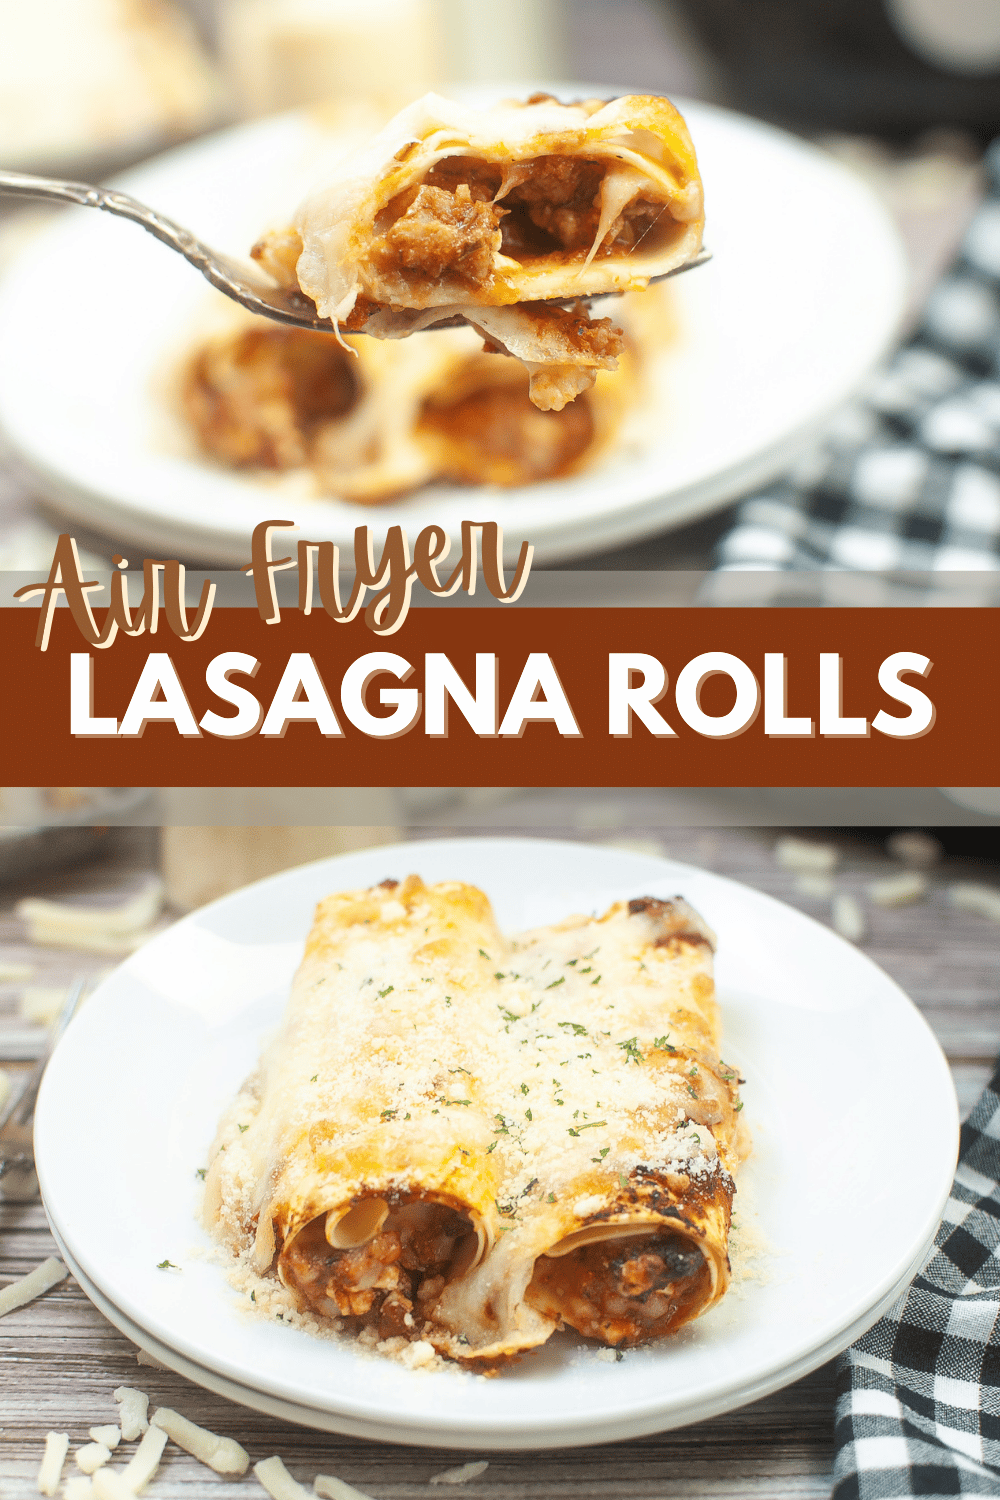 These Air Fryer Lasagna Rolls are the perfect easy weeknight dinner! Made with just a few simple ingredients, they’re ready in 30 minutes. #airfryerlasagnarolls #airfryer #lasagnarolls #lasagna #recipe via @wondermomwannab